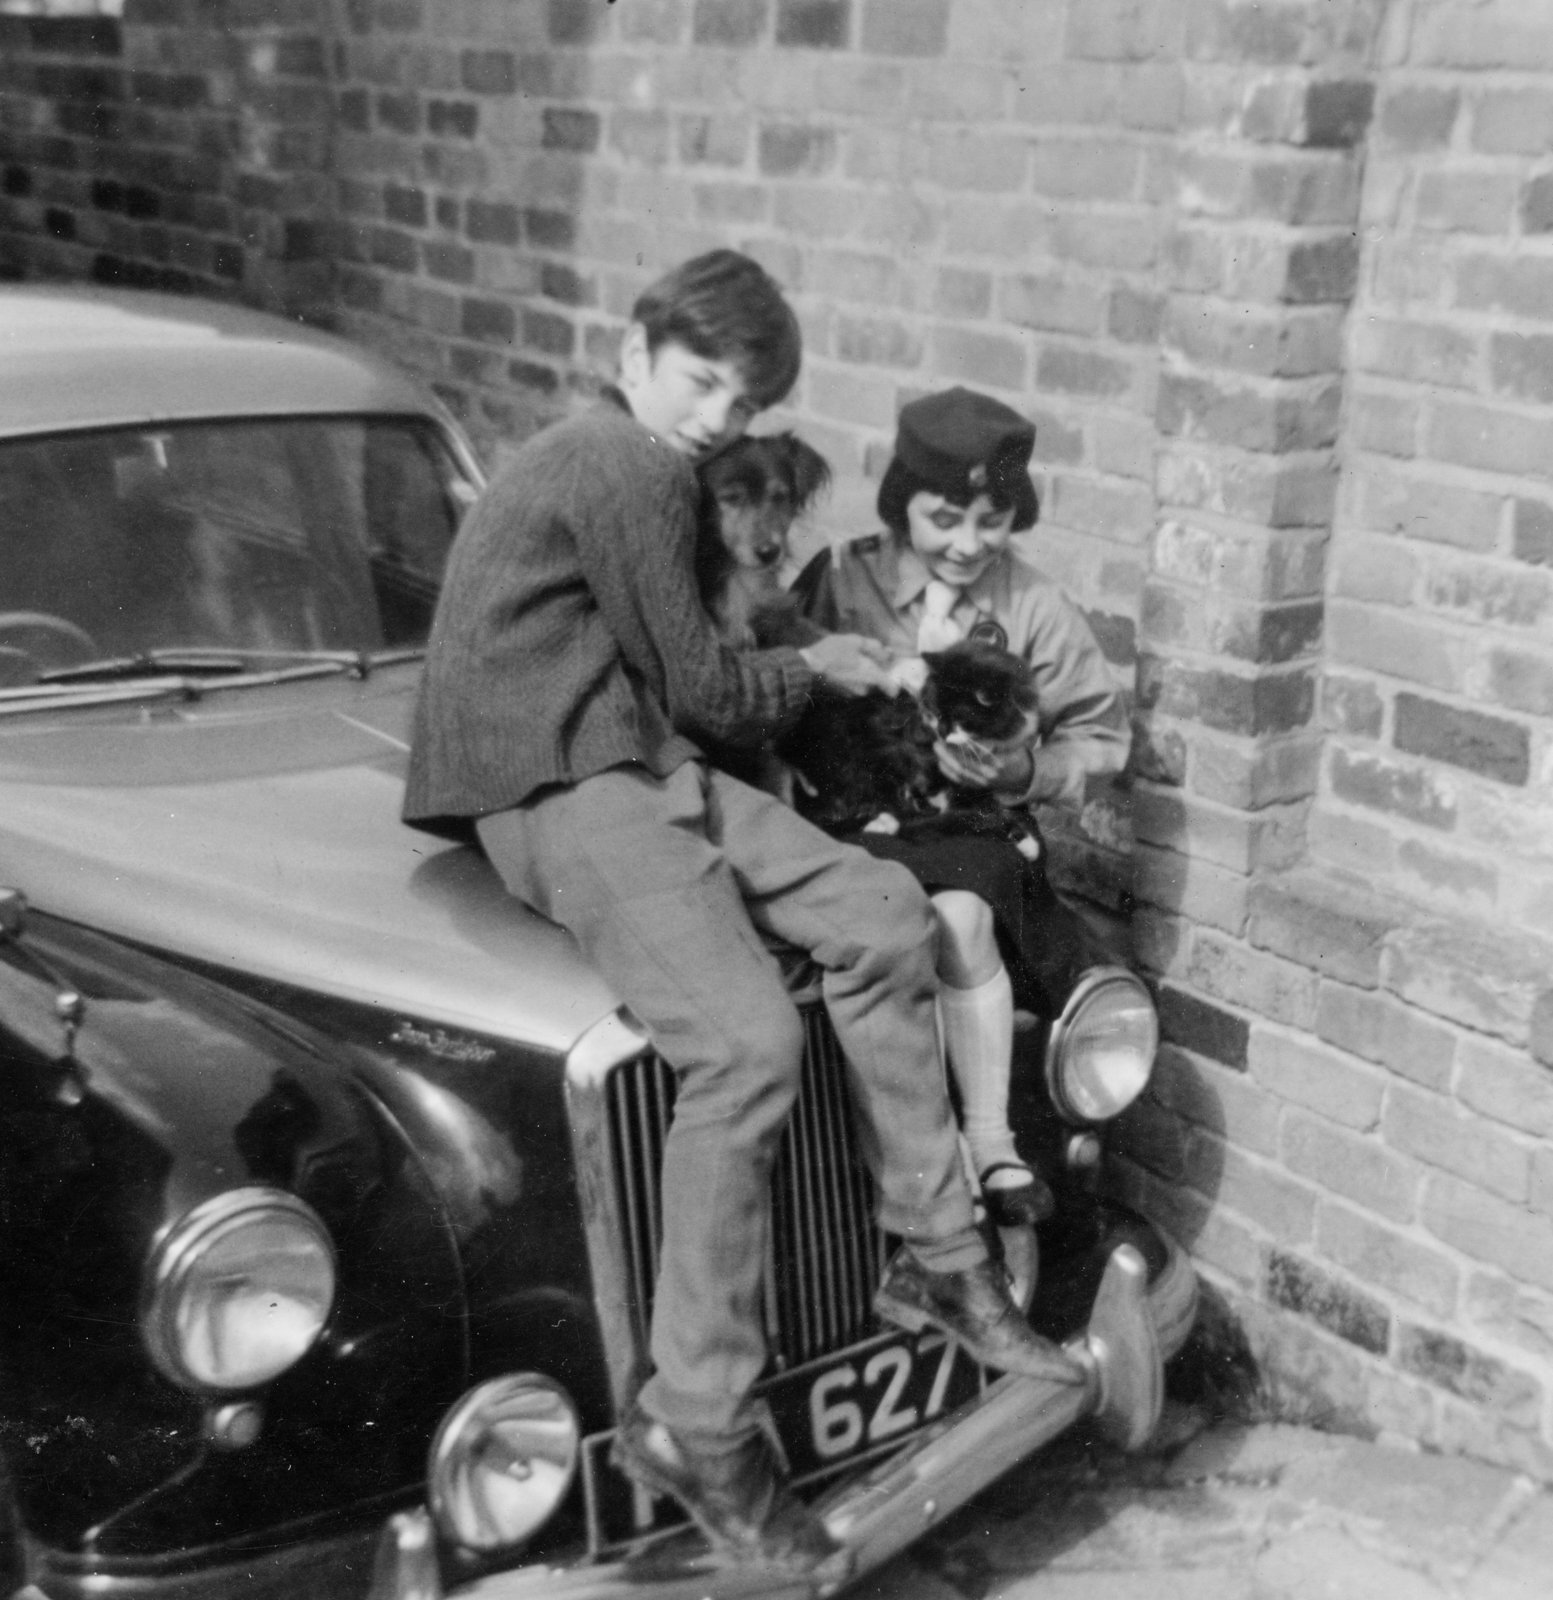 Meehaul and Fionnghuala Smith sitting on a car with family dog Whiskey, Birmingham c. 1967.